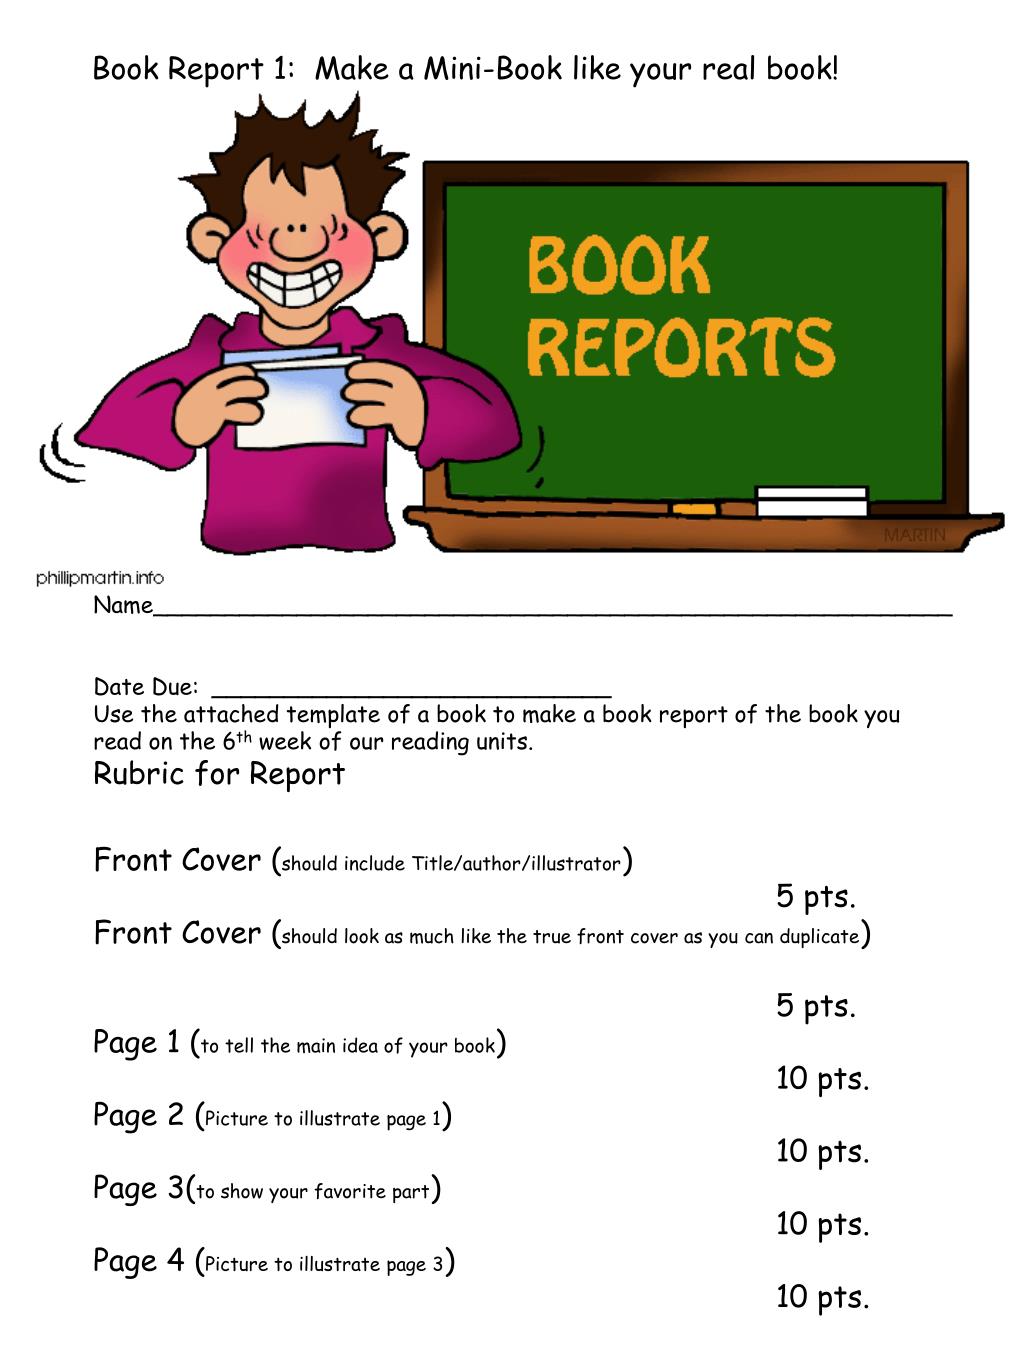 ppt-book-report-1-make-a-mini-book-like-your-real-book-powerpoint